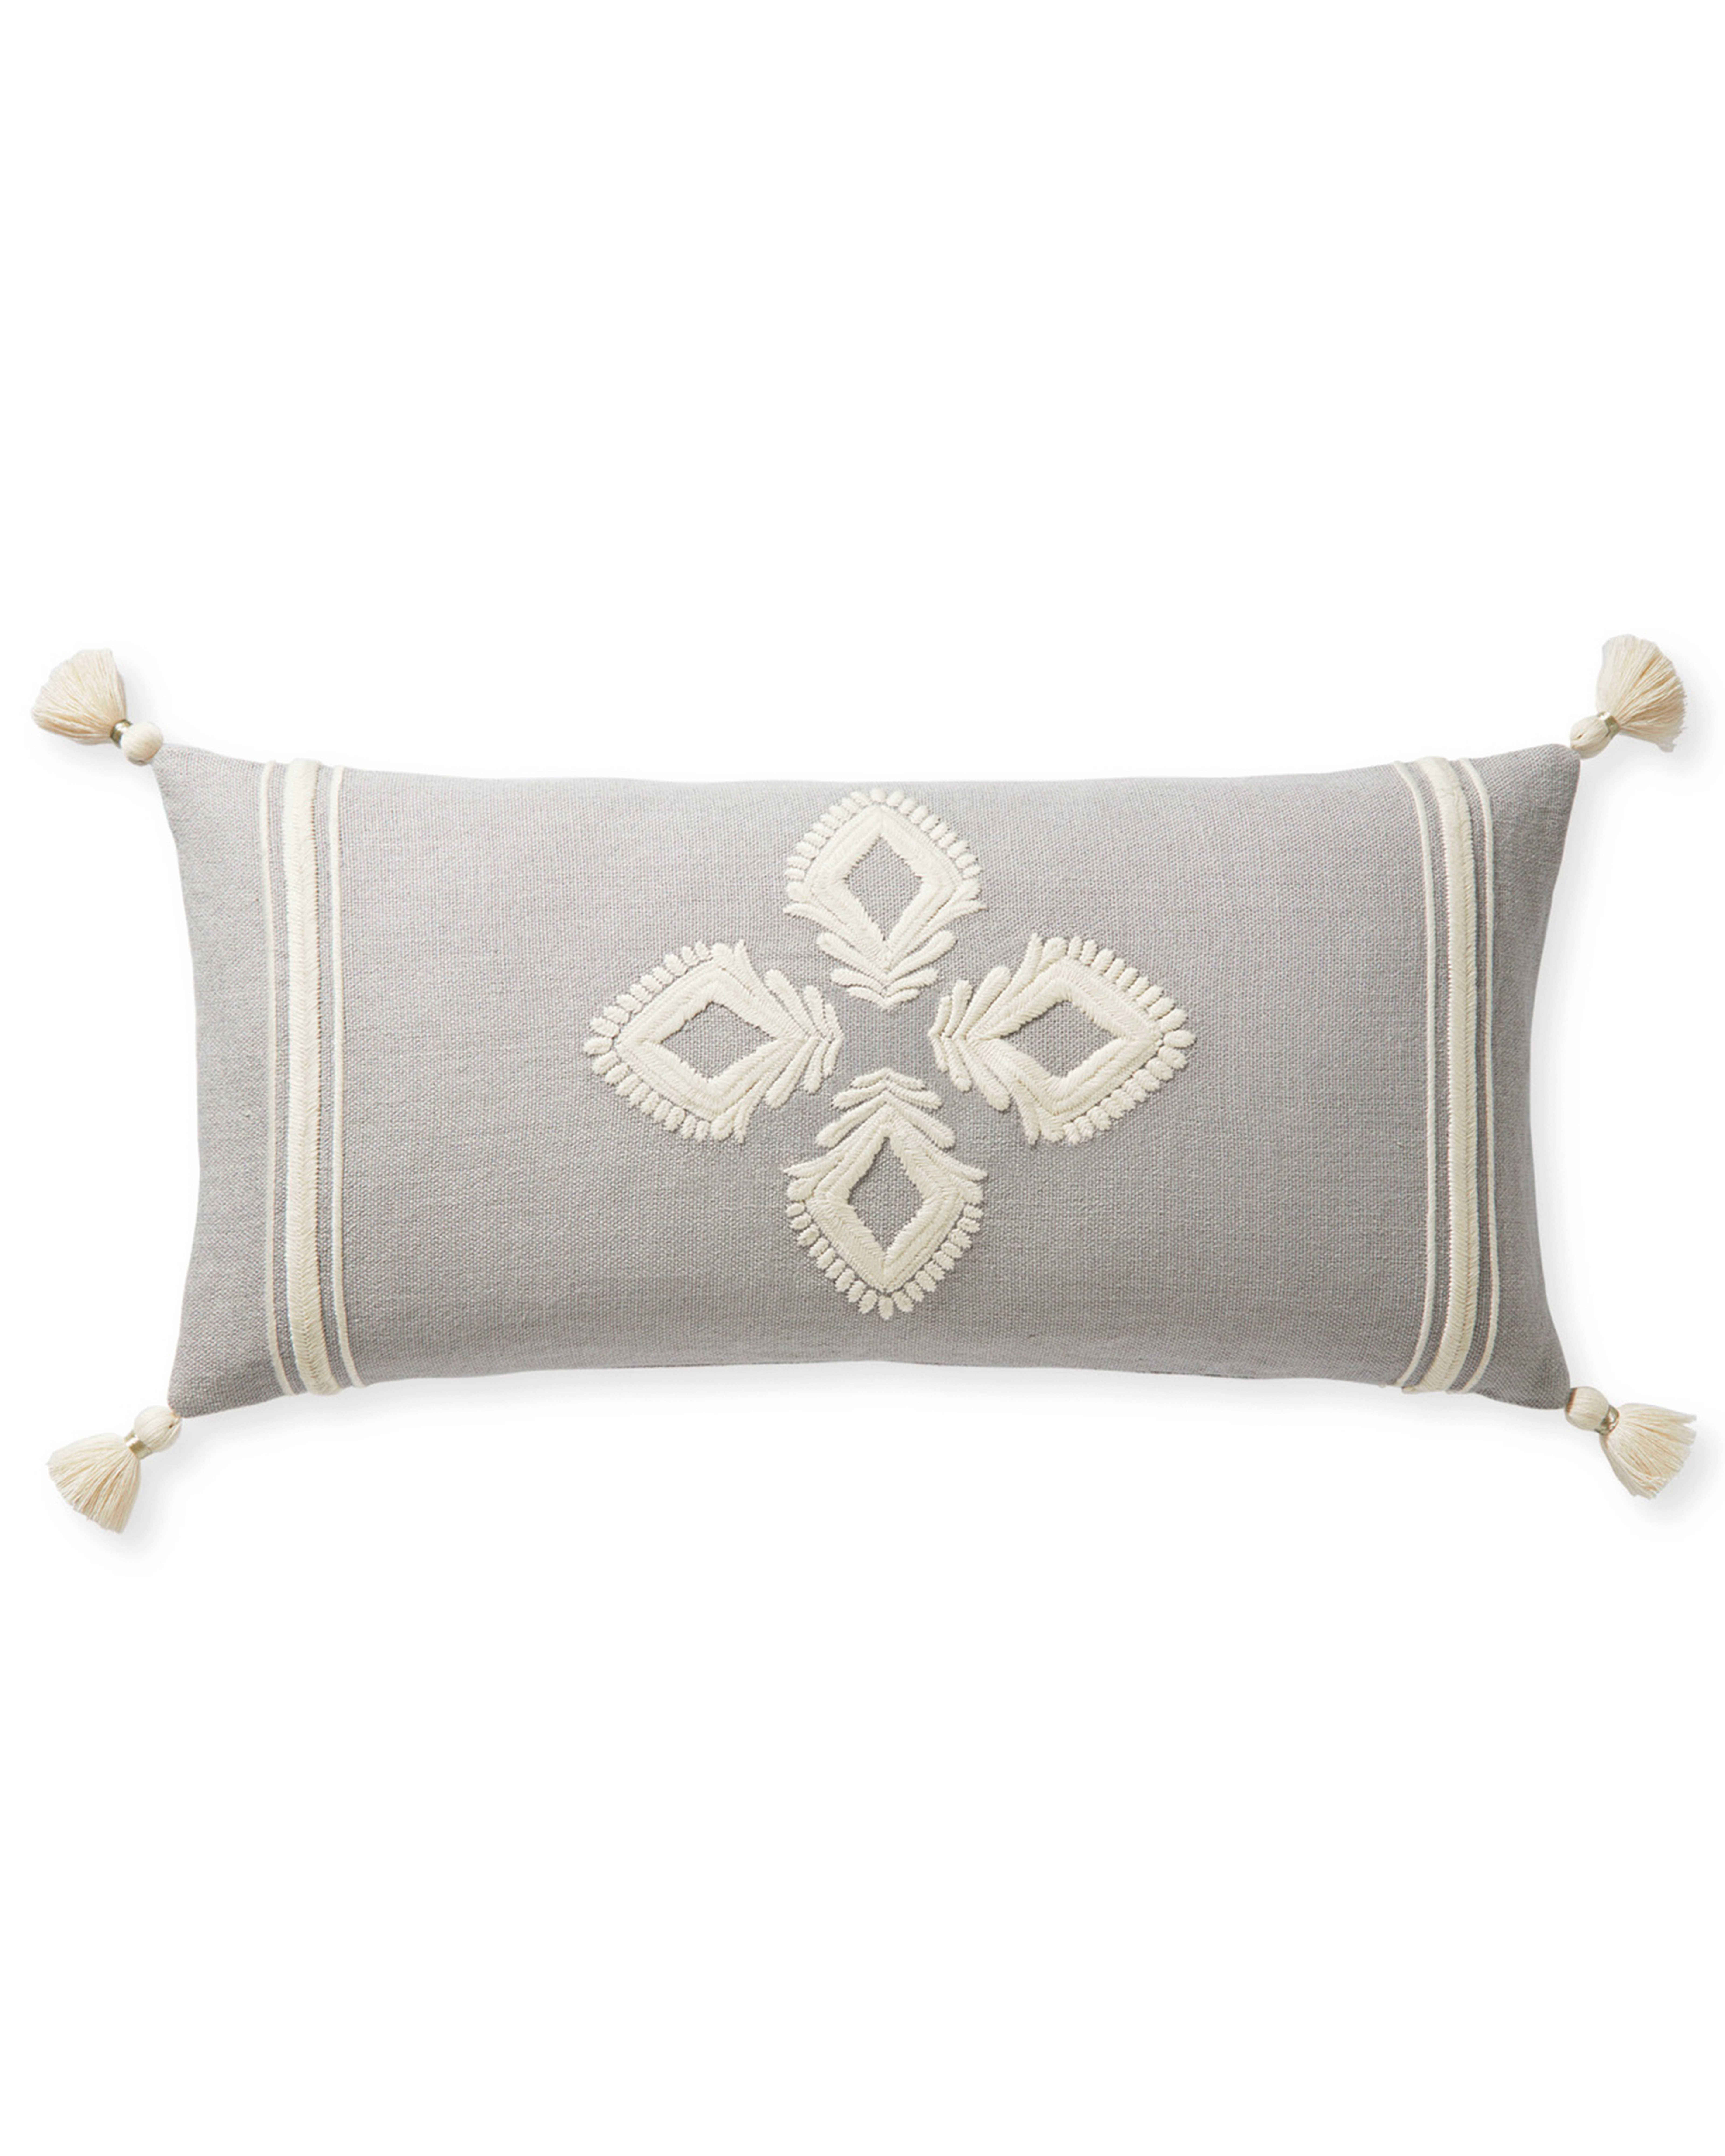 Leighton Pillow Cover - Serena and Lily